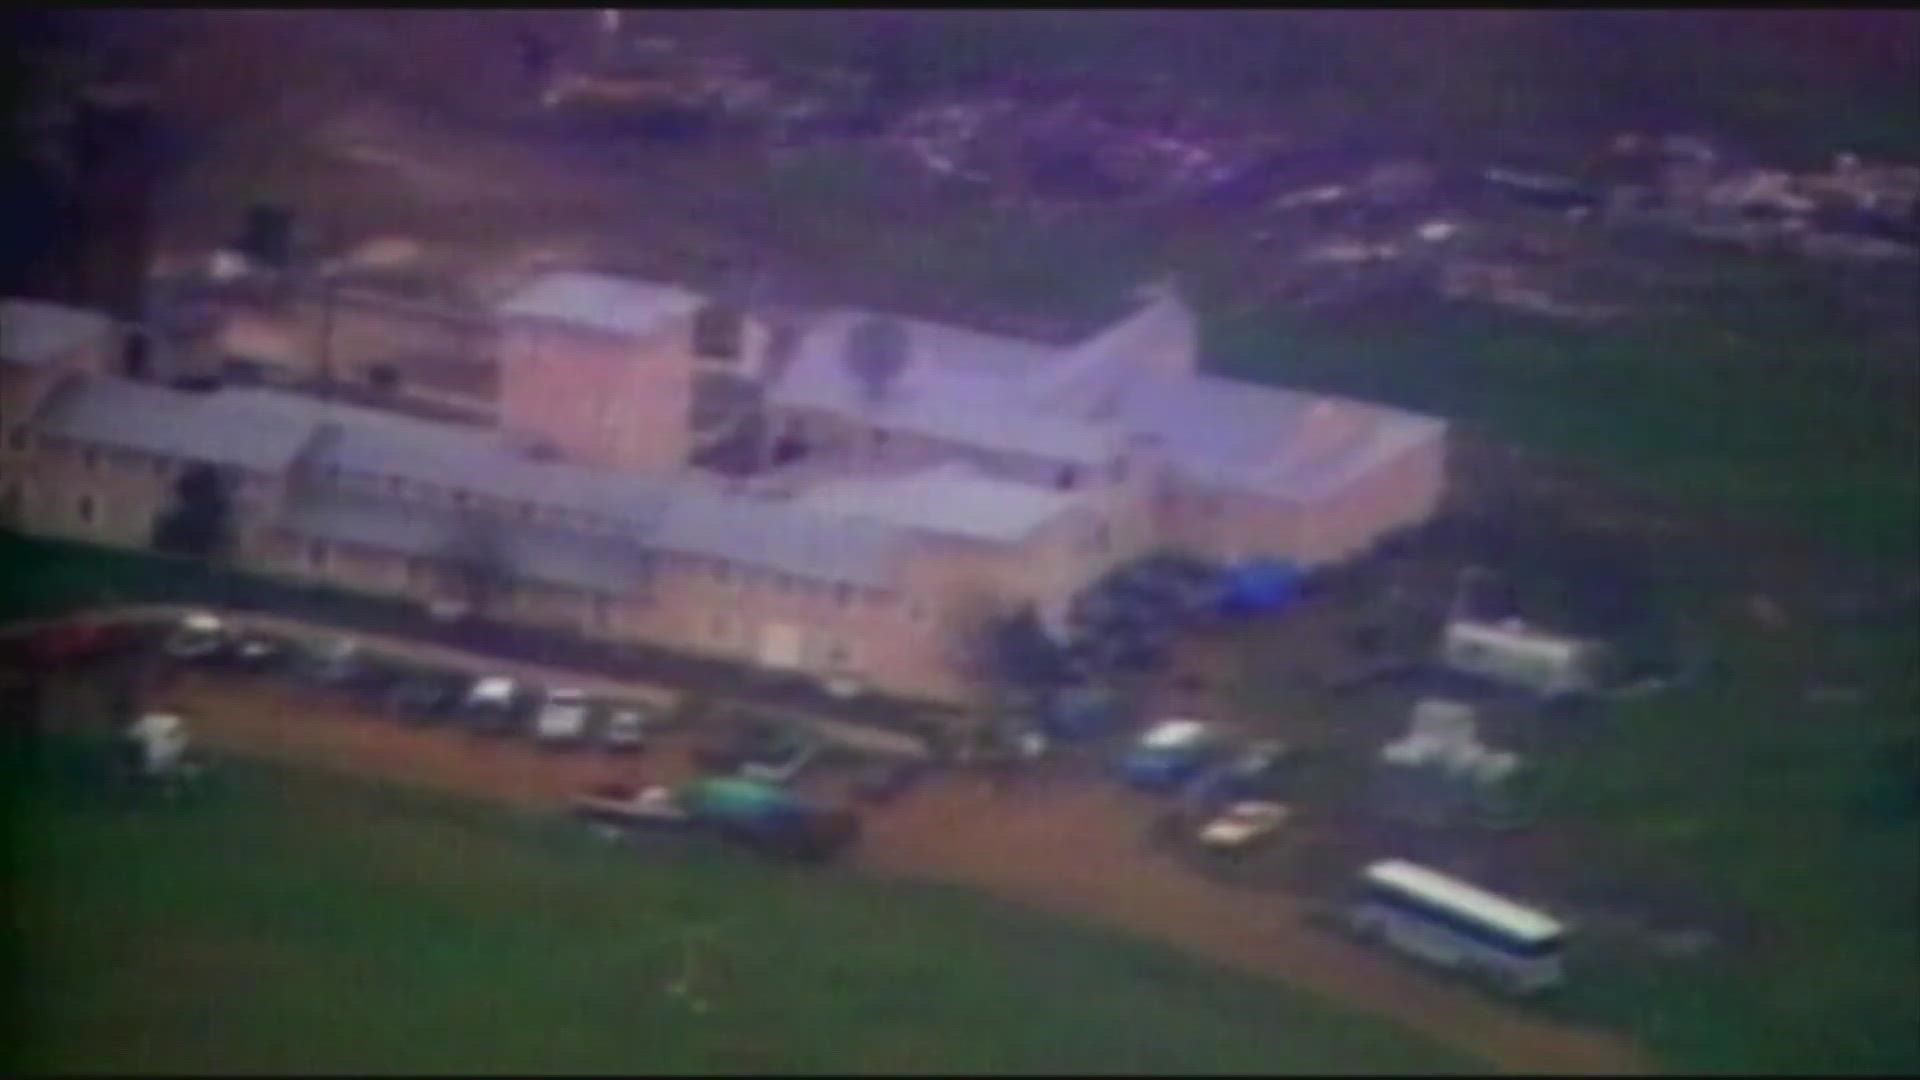 Four federal agents were killed on Feb. 28, 1993 at the Branch Davidian Compound in Mount Carmel, starting the 51-day siege. Six Branch Davidians were also killed.